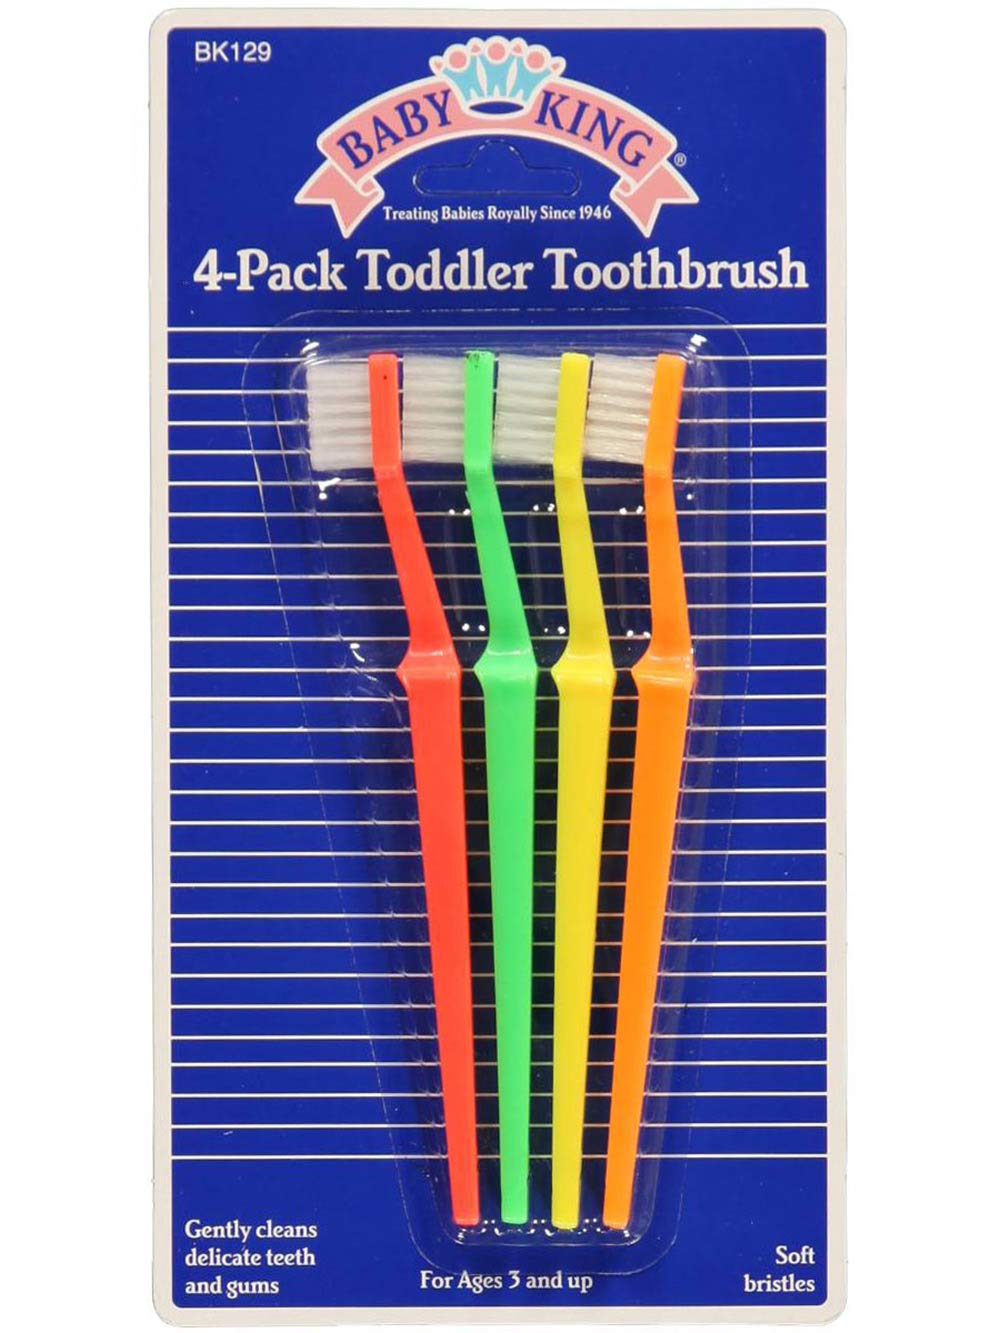 Baby King Toddler Toothbrushes, Yellow Multi, One Size, 1 Count